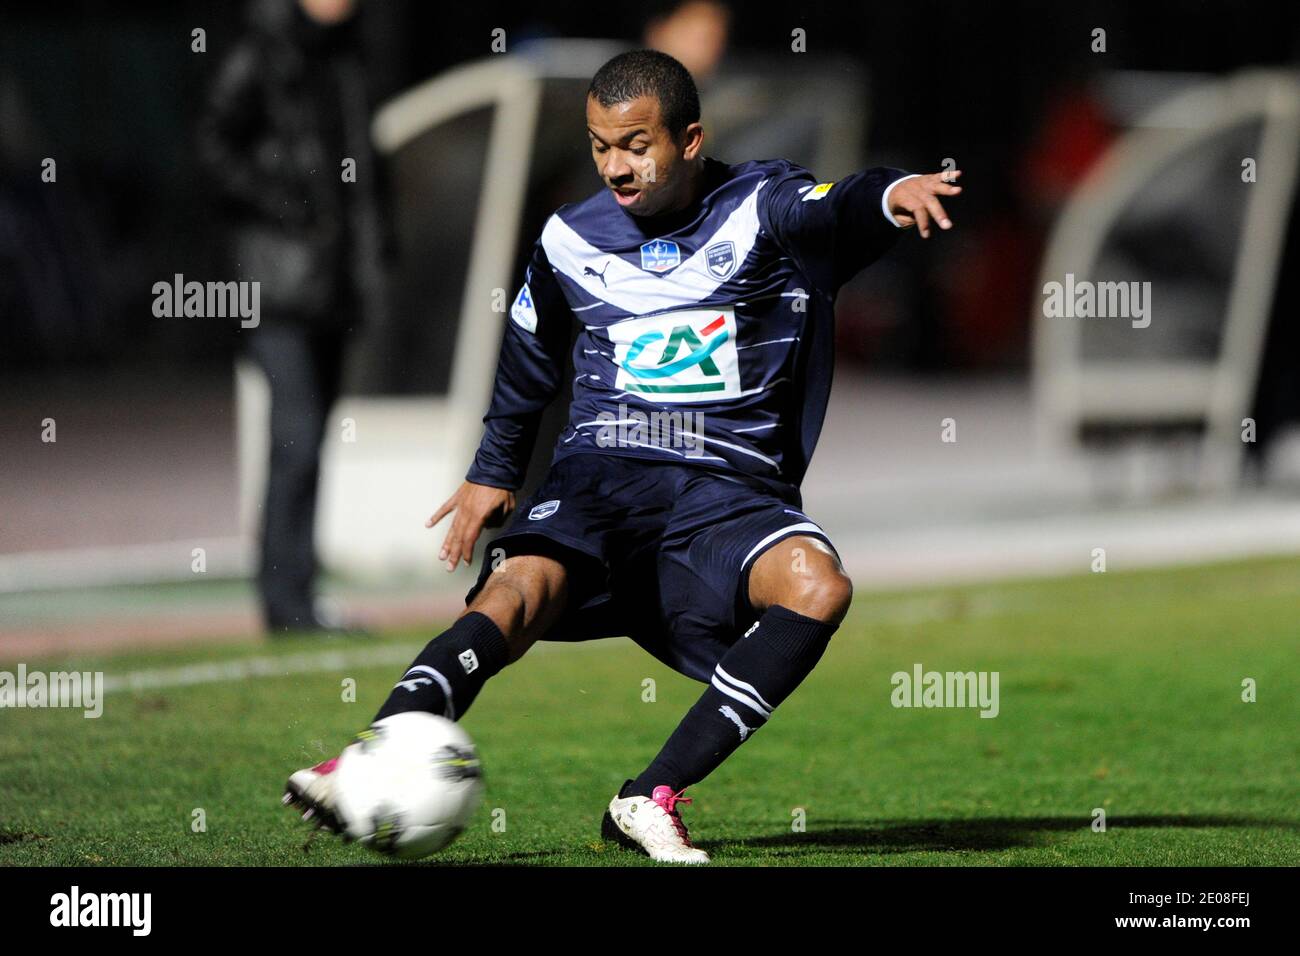 Bordeaux' Mariano during the French Cup 1/16e round soccer match, Creteil Vs Bordeaux in Creteil, France on January 21st, 2012. Bordeaux won 4 penalties to 2 after a 2-2 draw. Photo by Henri Szwarc/ABACAPRESS.COM Stock Photo